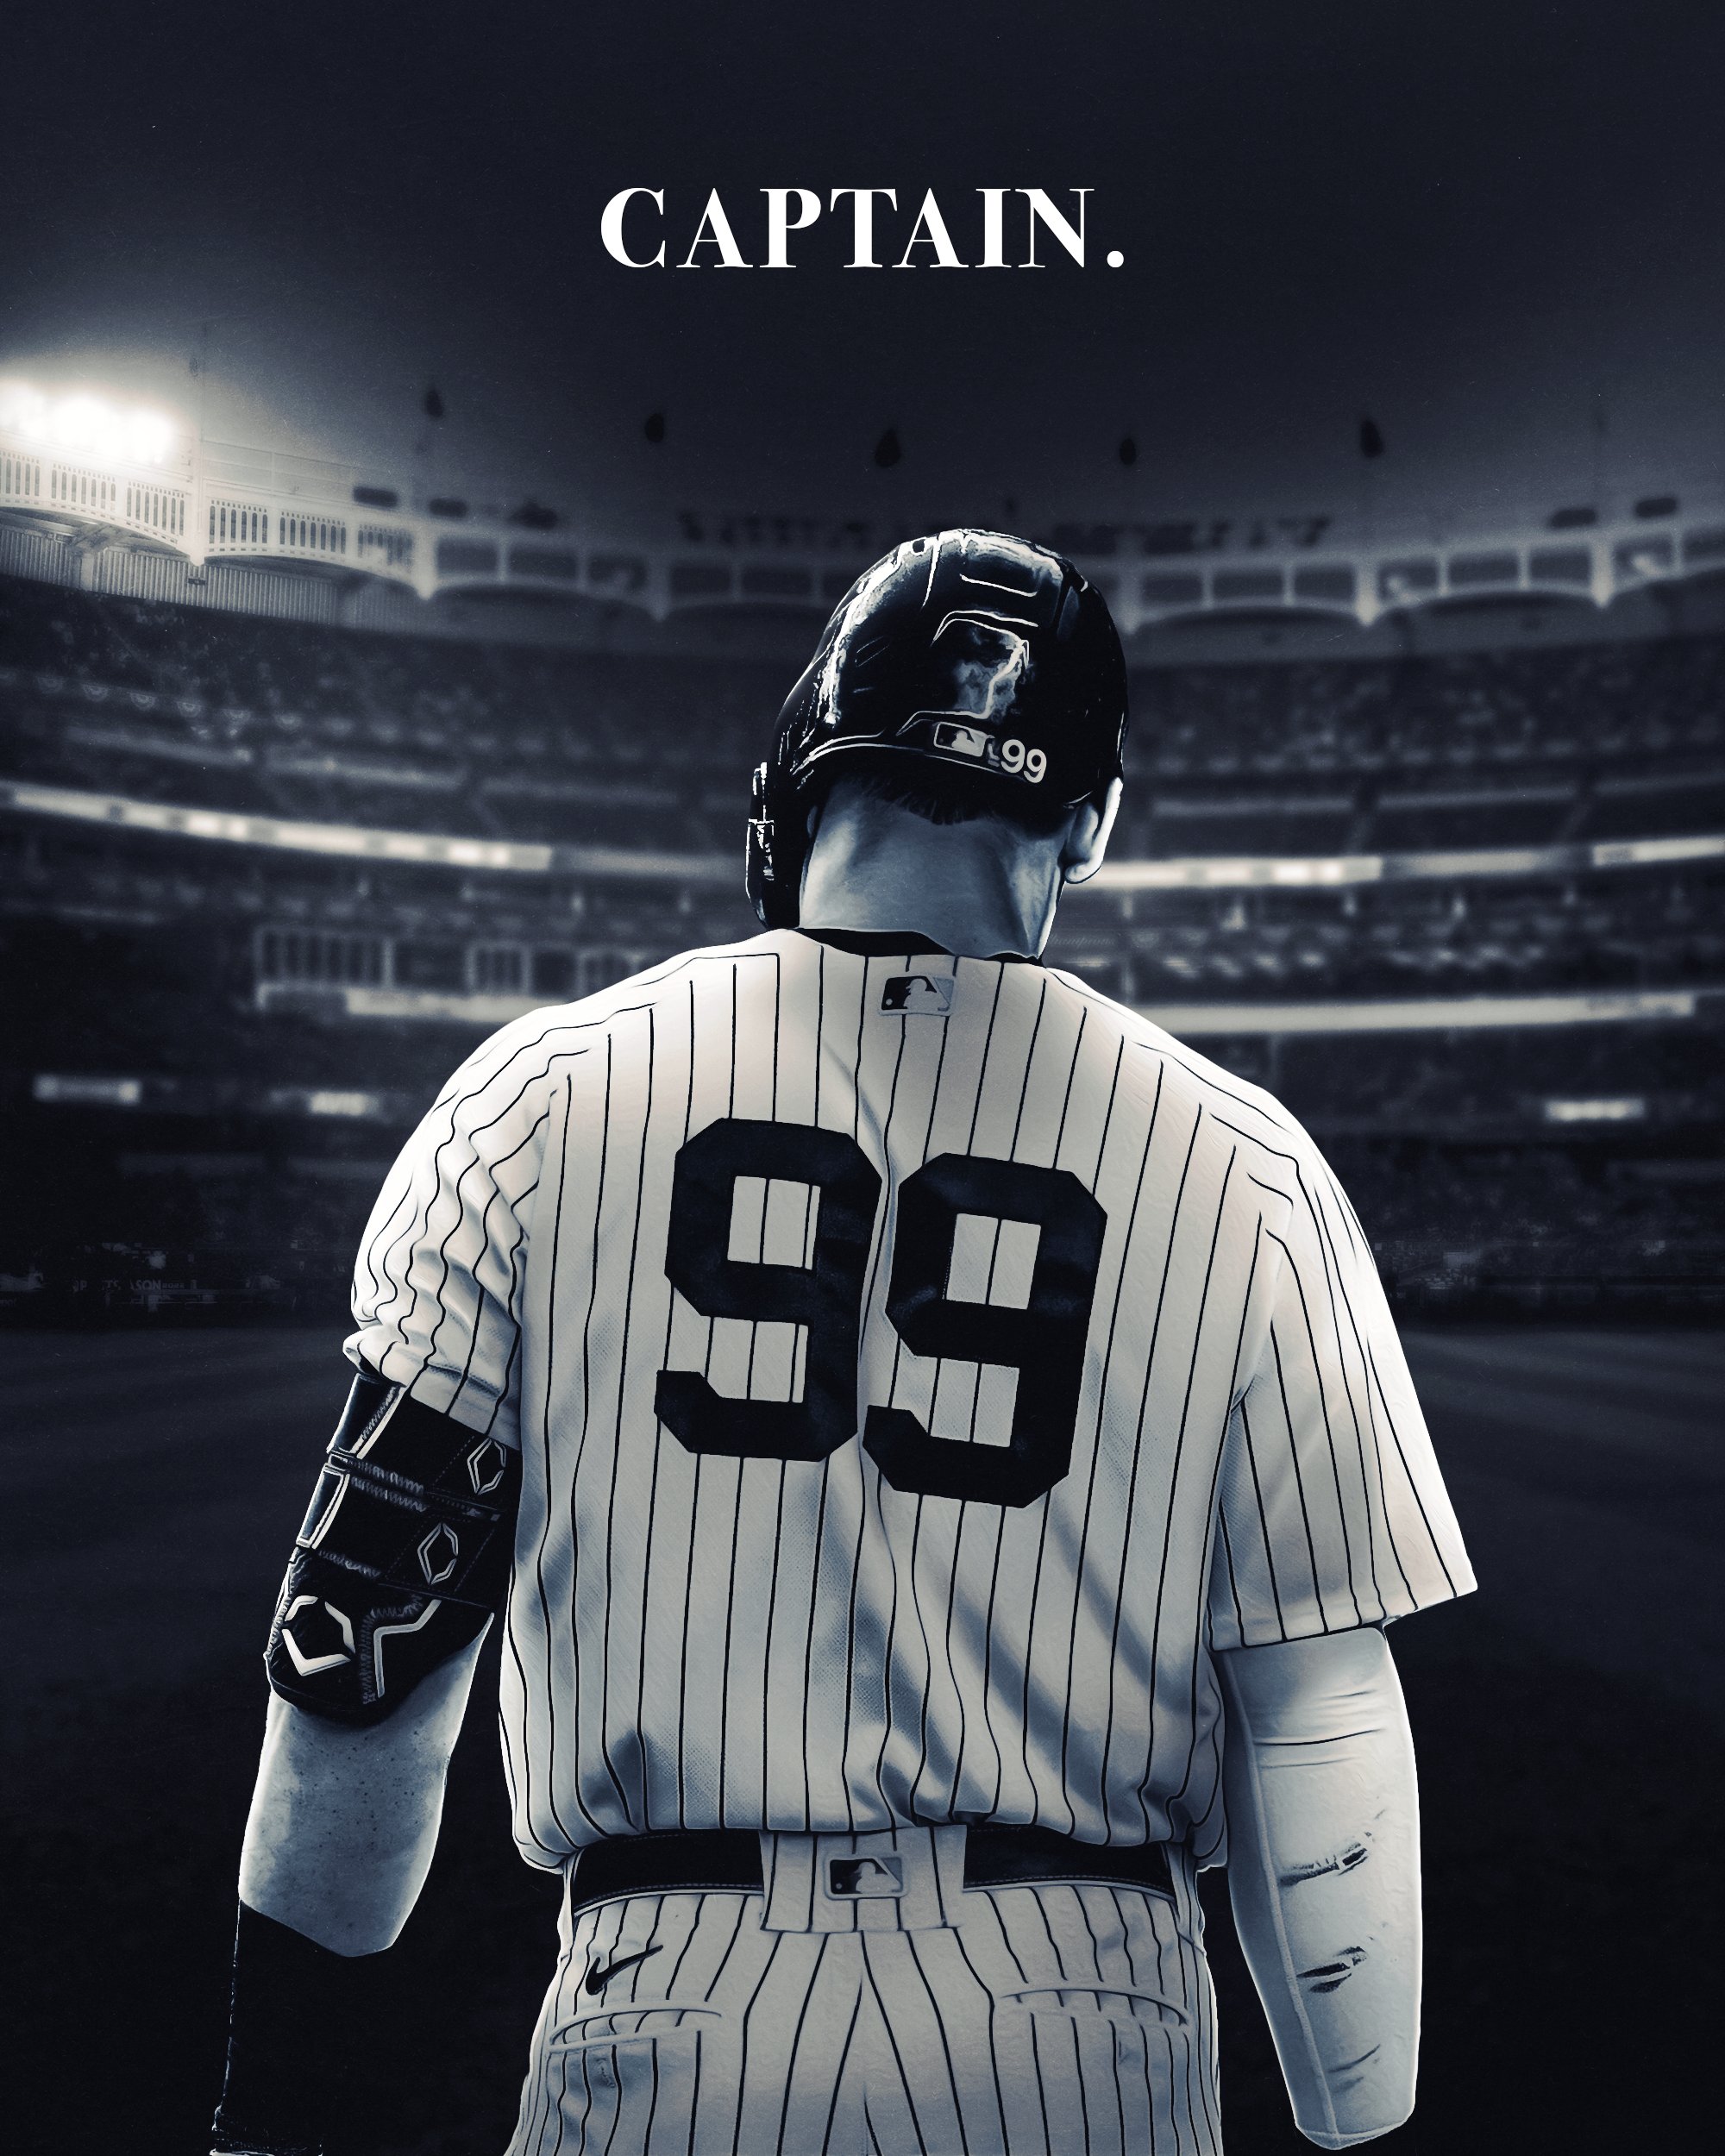 MLB on X: He's the Captain now! Aaron Judge is officially the